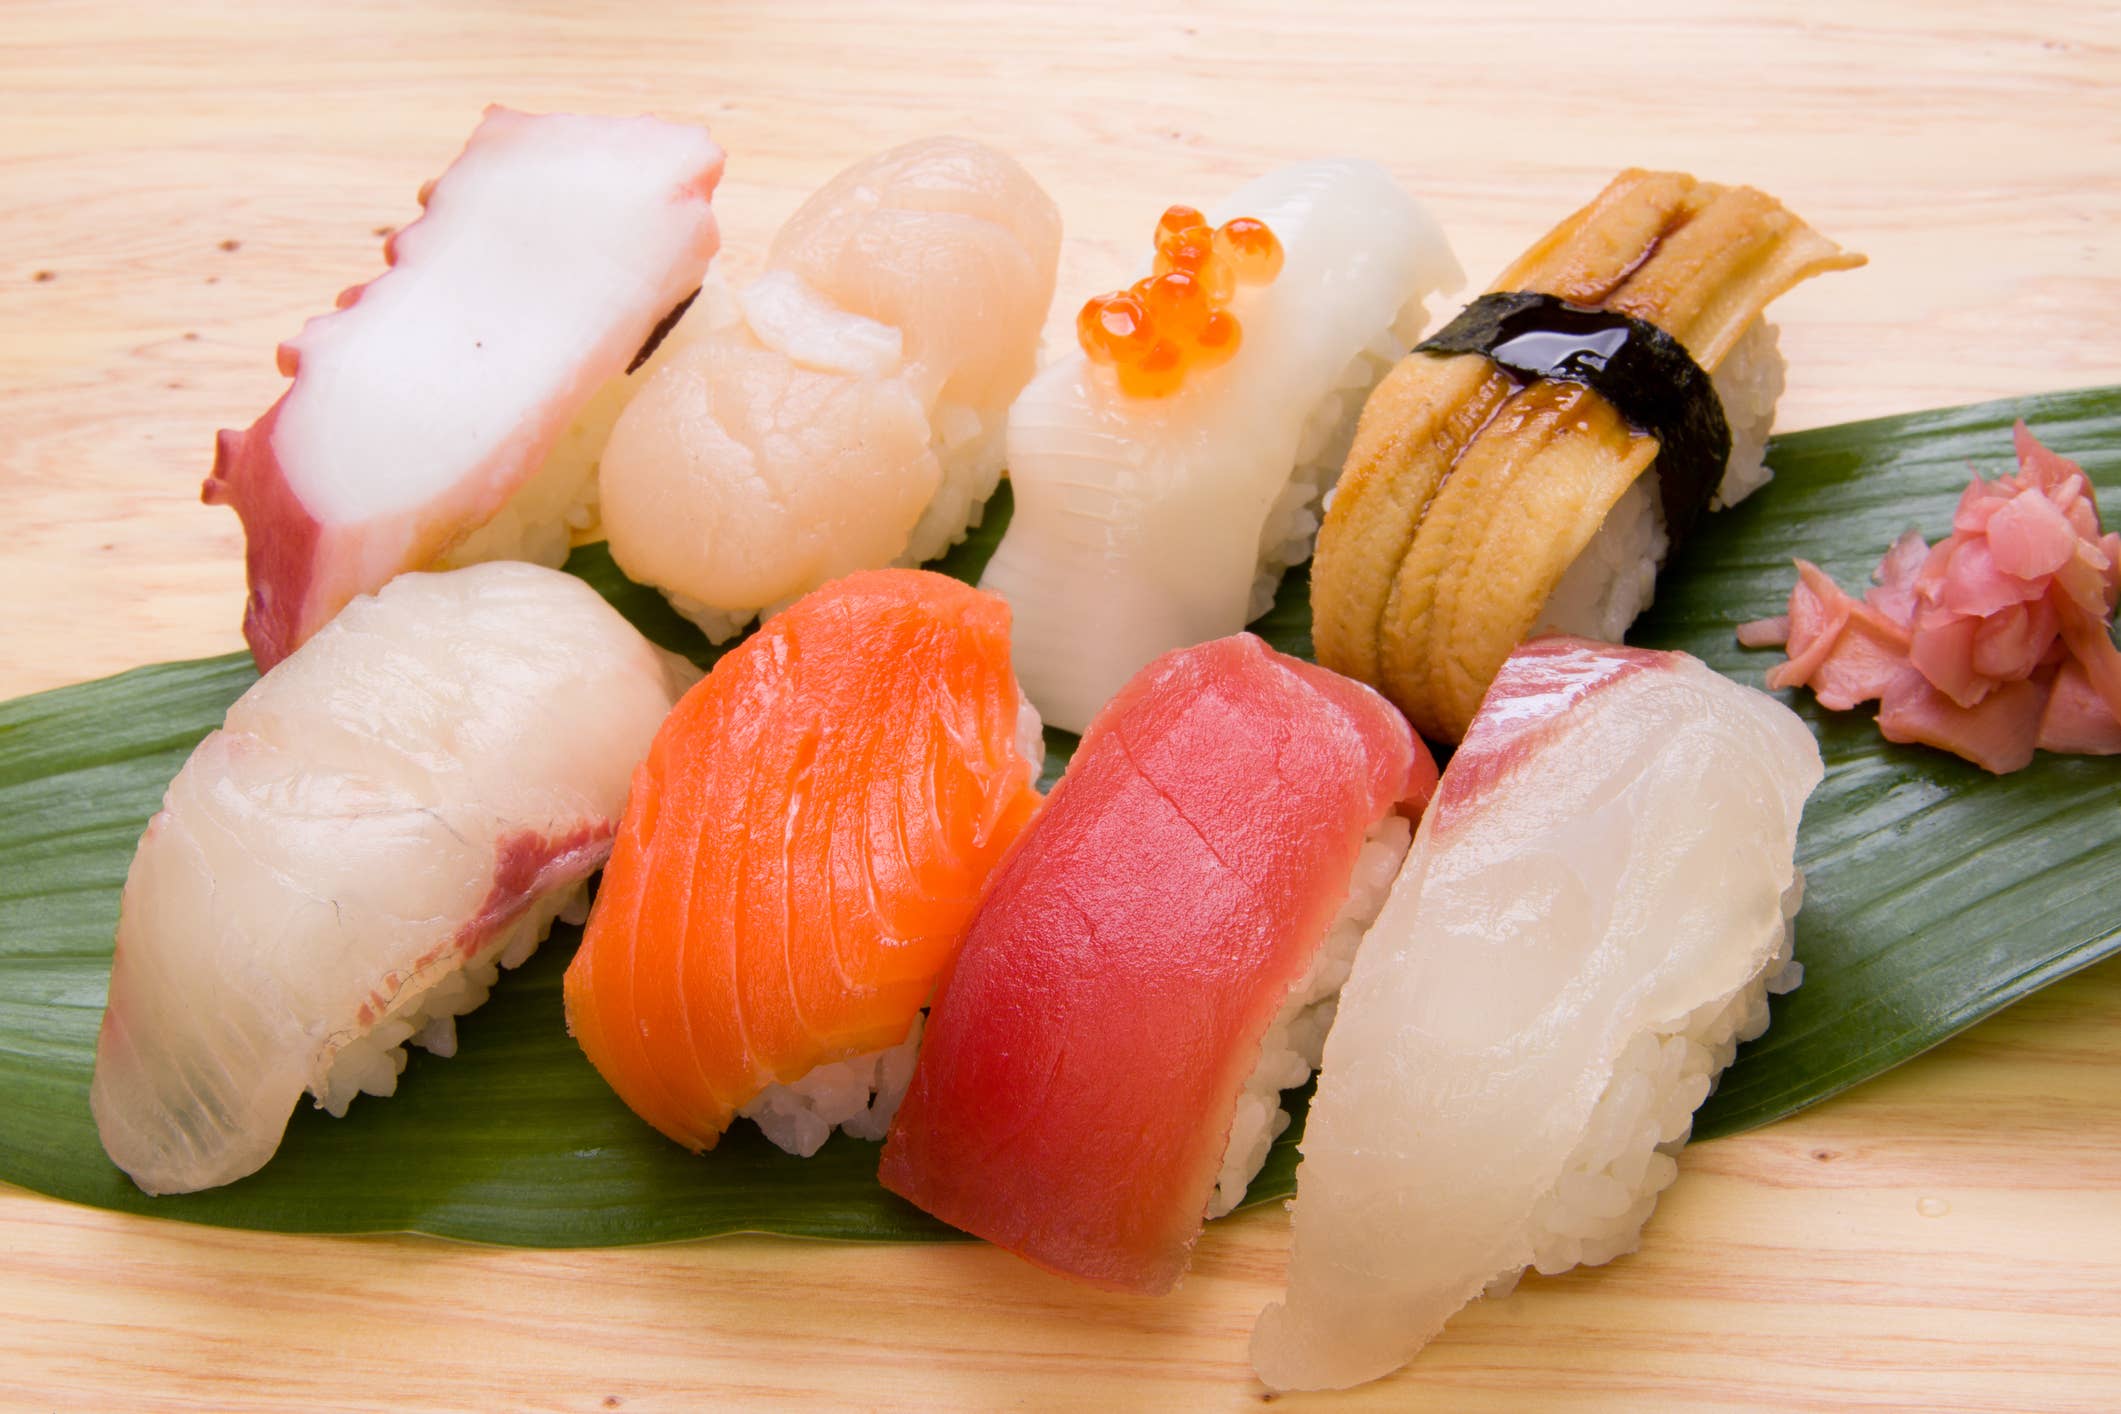 Which country is credited with inventing sushi?